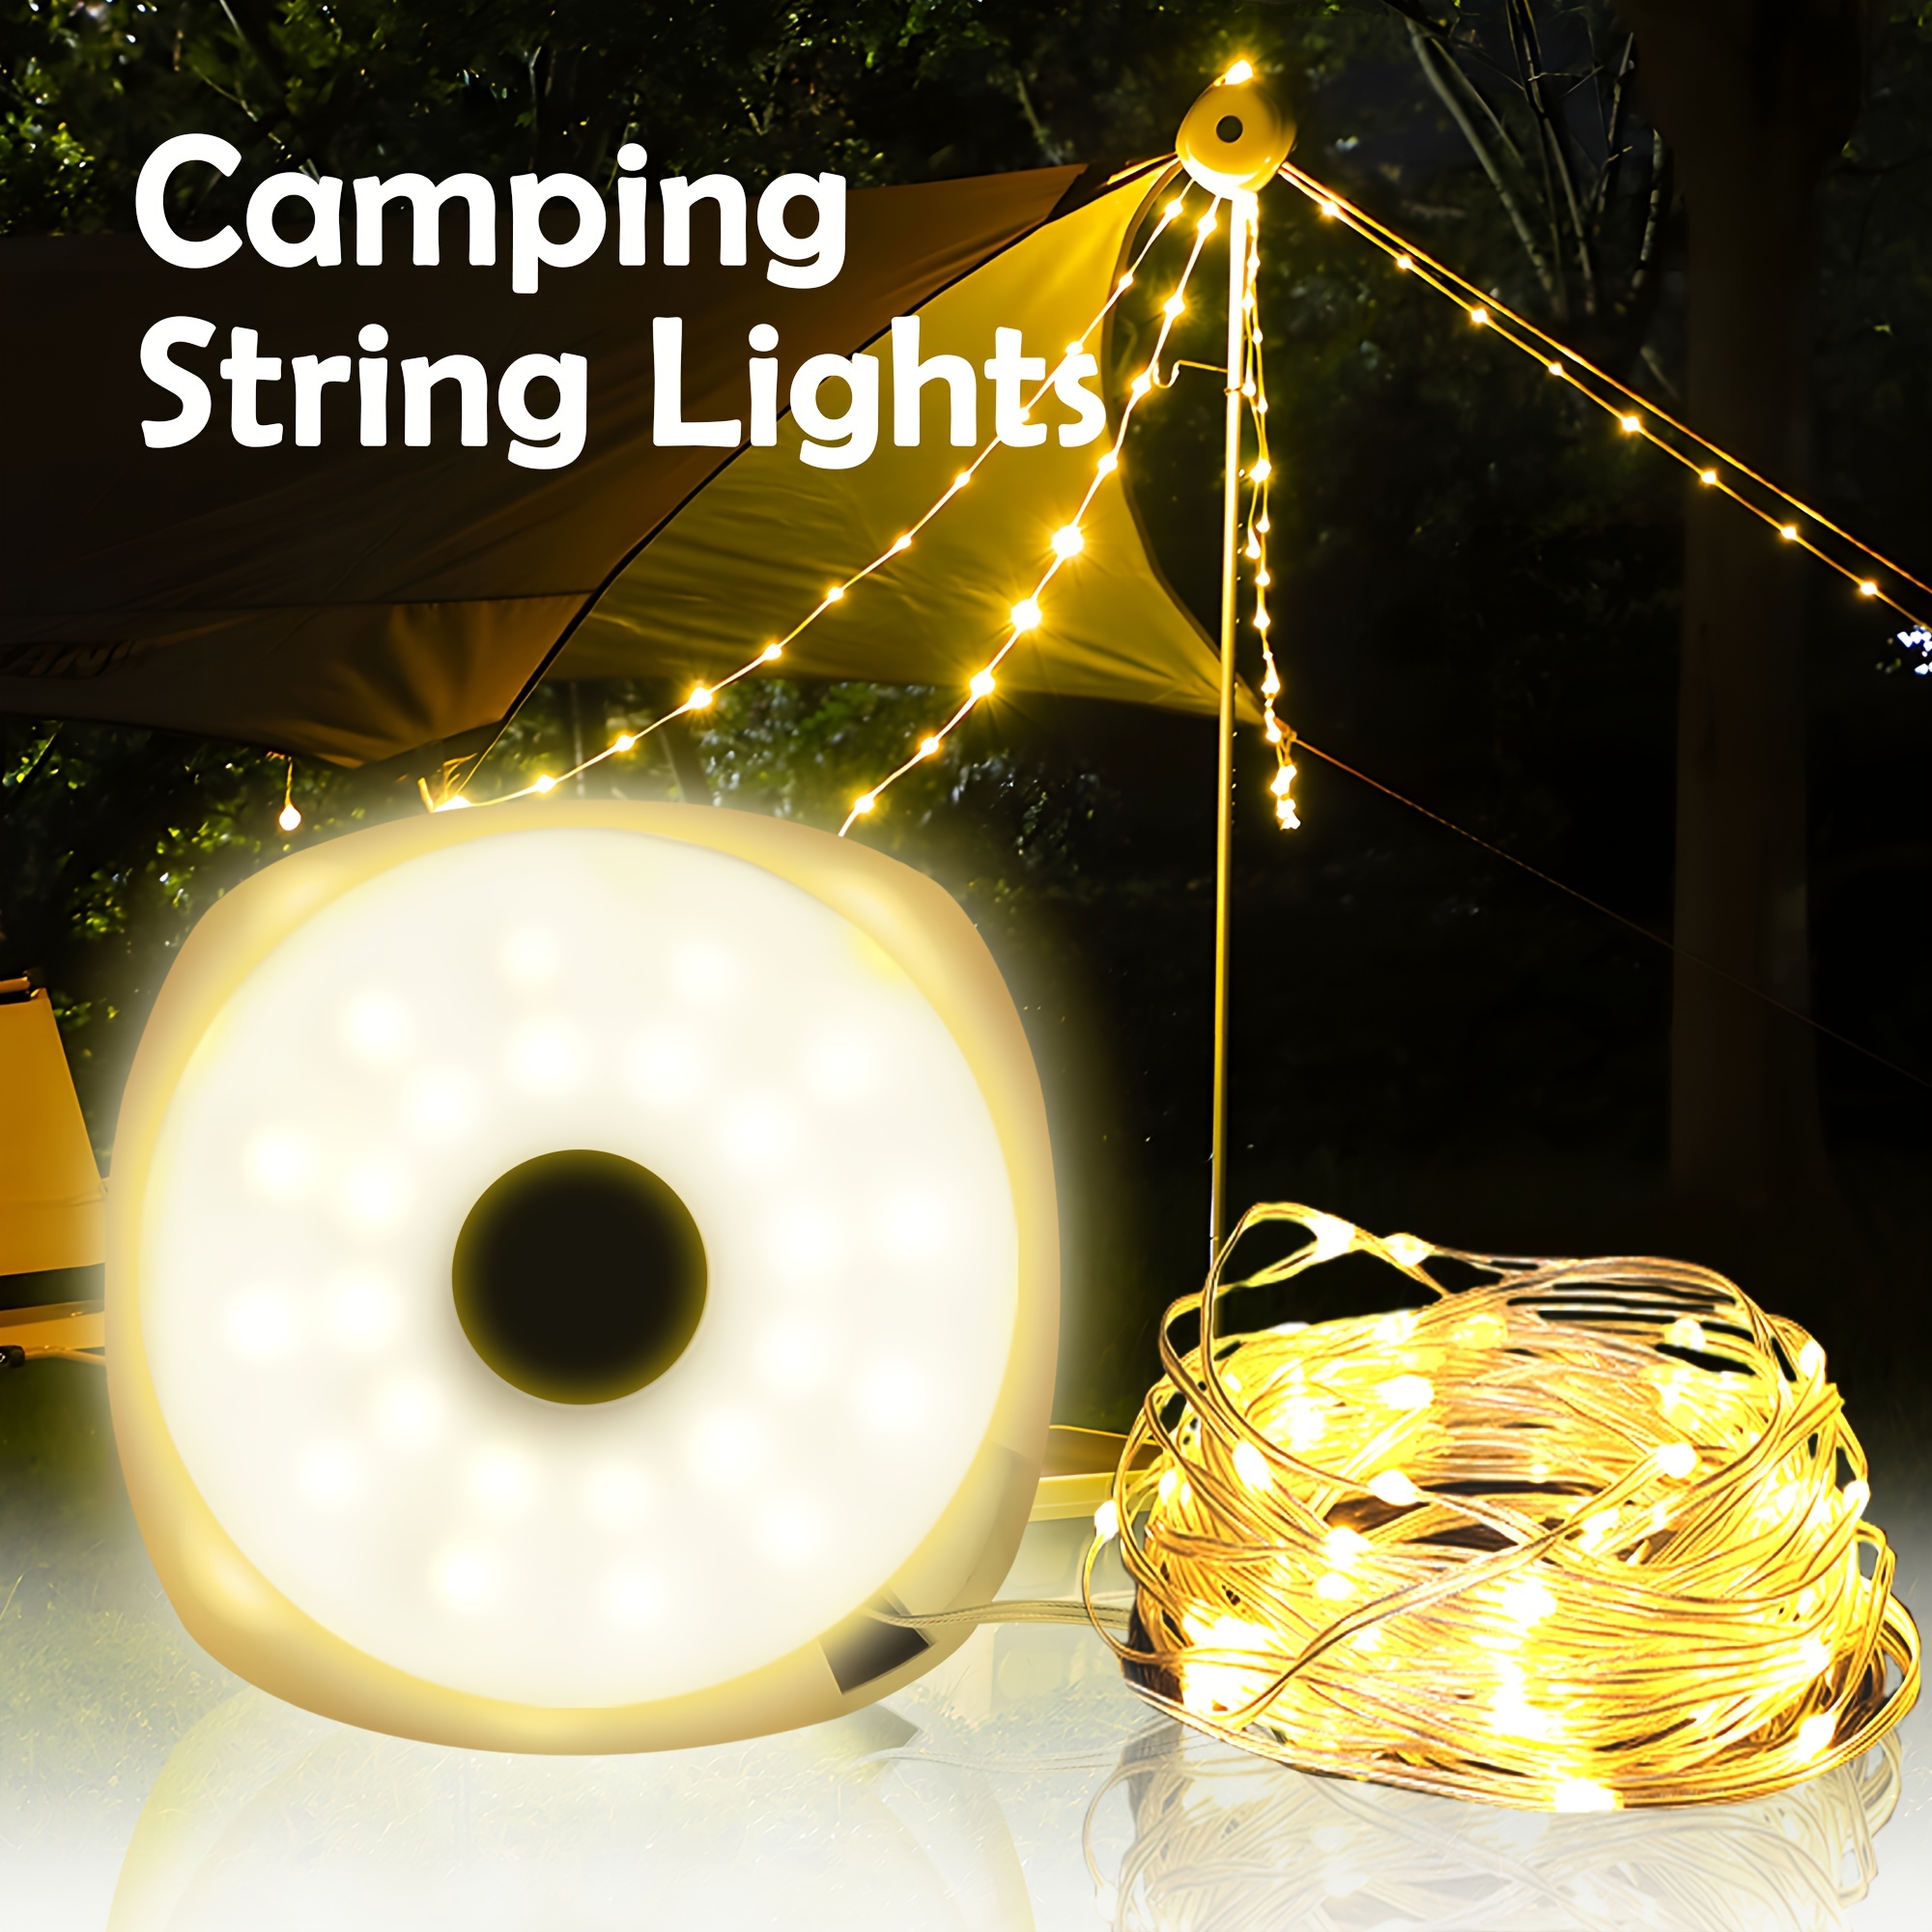 

1pc Retractable Camping String Light, Multifunctional Portable Light, Portable Led Rechargeable Waterproof Tent Light For Emergency, Outdoor, Hiking, Camping